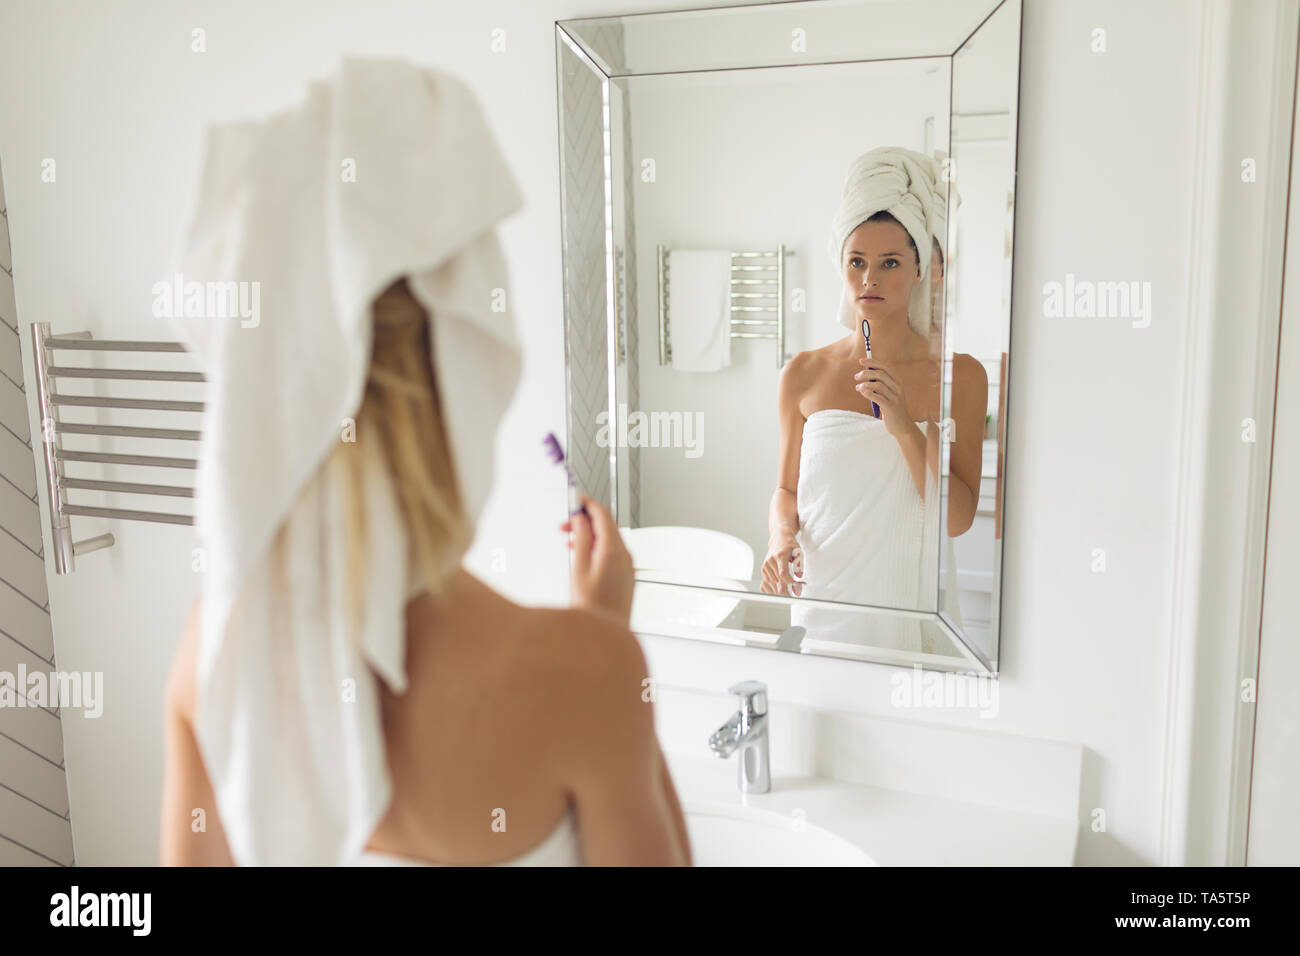 Beautiful woman standing in front of mirror while holding toothbrush Stock Photo